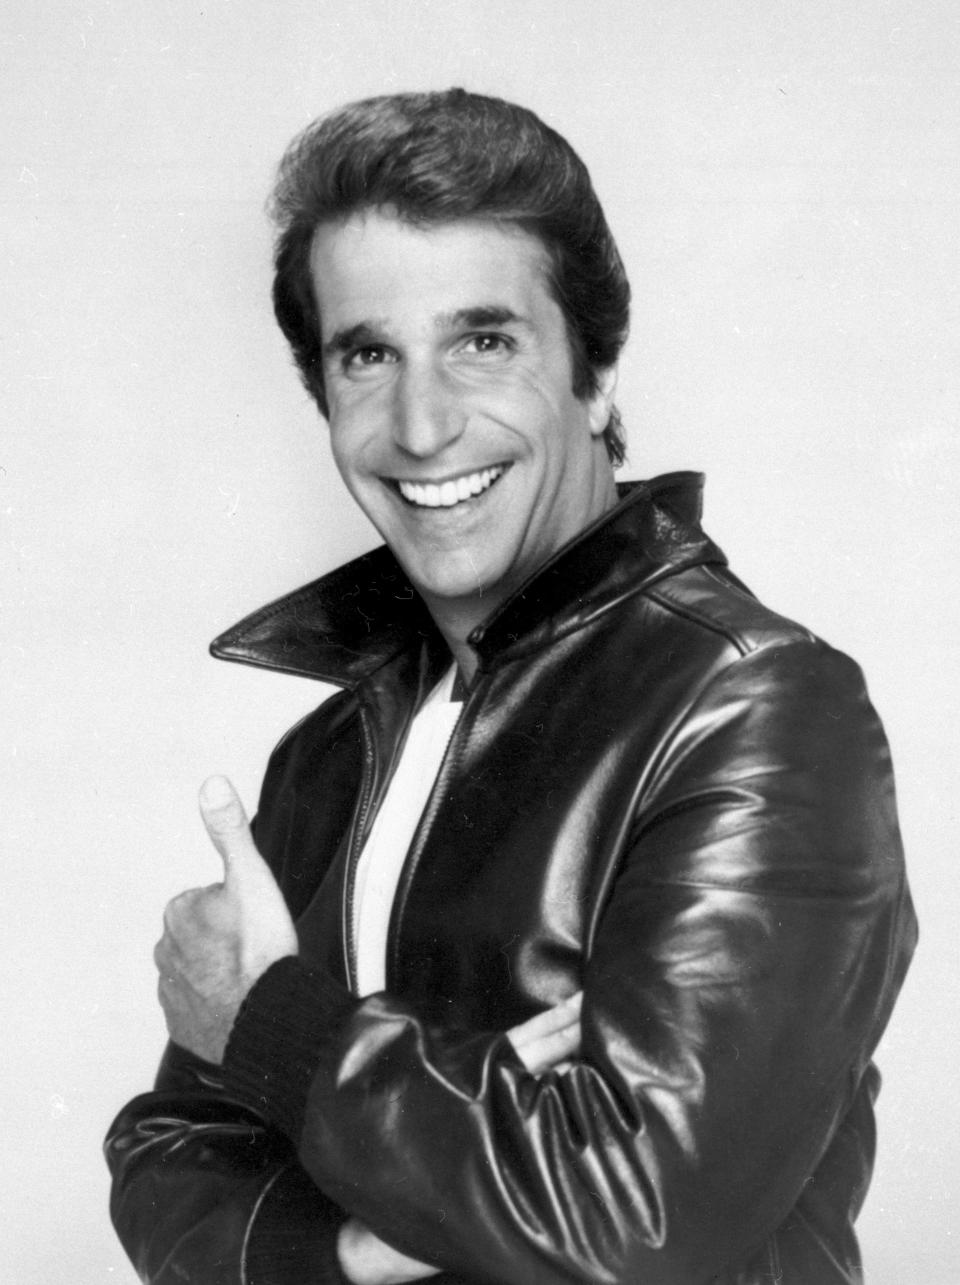 Henry Winkler, seen here in a 1984 photo dressed as Arthur Fonzarelli, aka "Fonzie" and "The Fonz," became a star playing the cool biker on ABC's "Happy Days."